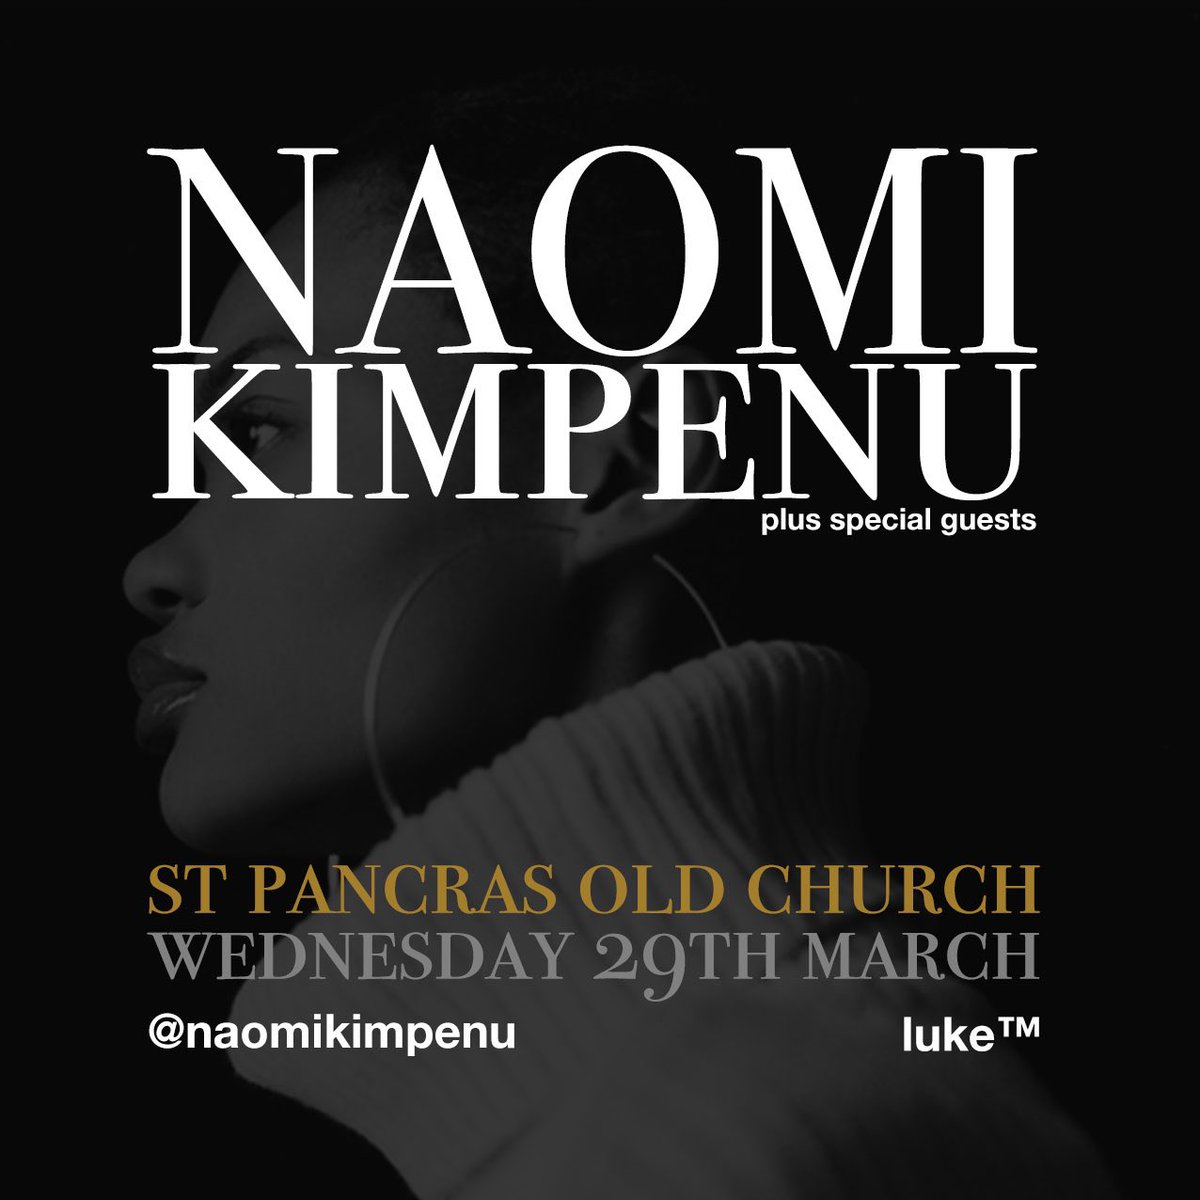 ￼ Exciting news! ￼ Ivor Novello Award-winning singer-songwriter and producer Naomi Kimpenu is thrilled to announce her debut headline show at the beautiful St Pancras Old Church, one of London's most stunning intimate music venues. ￼ Don't miss this incredible event!